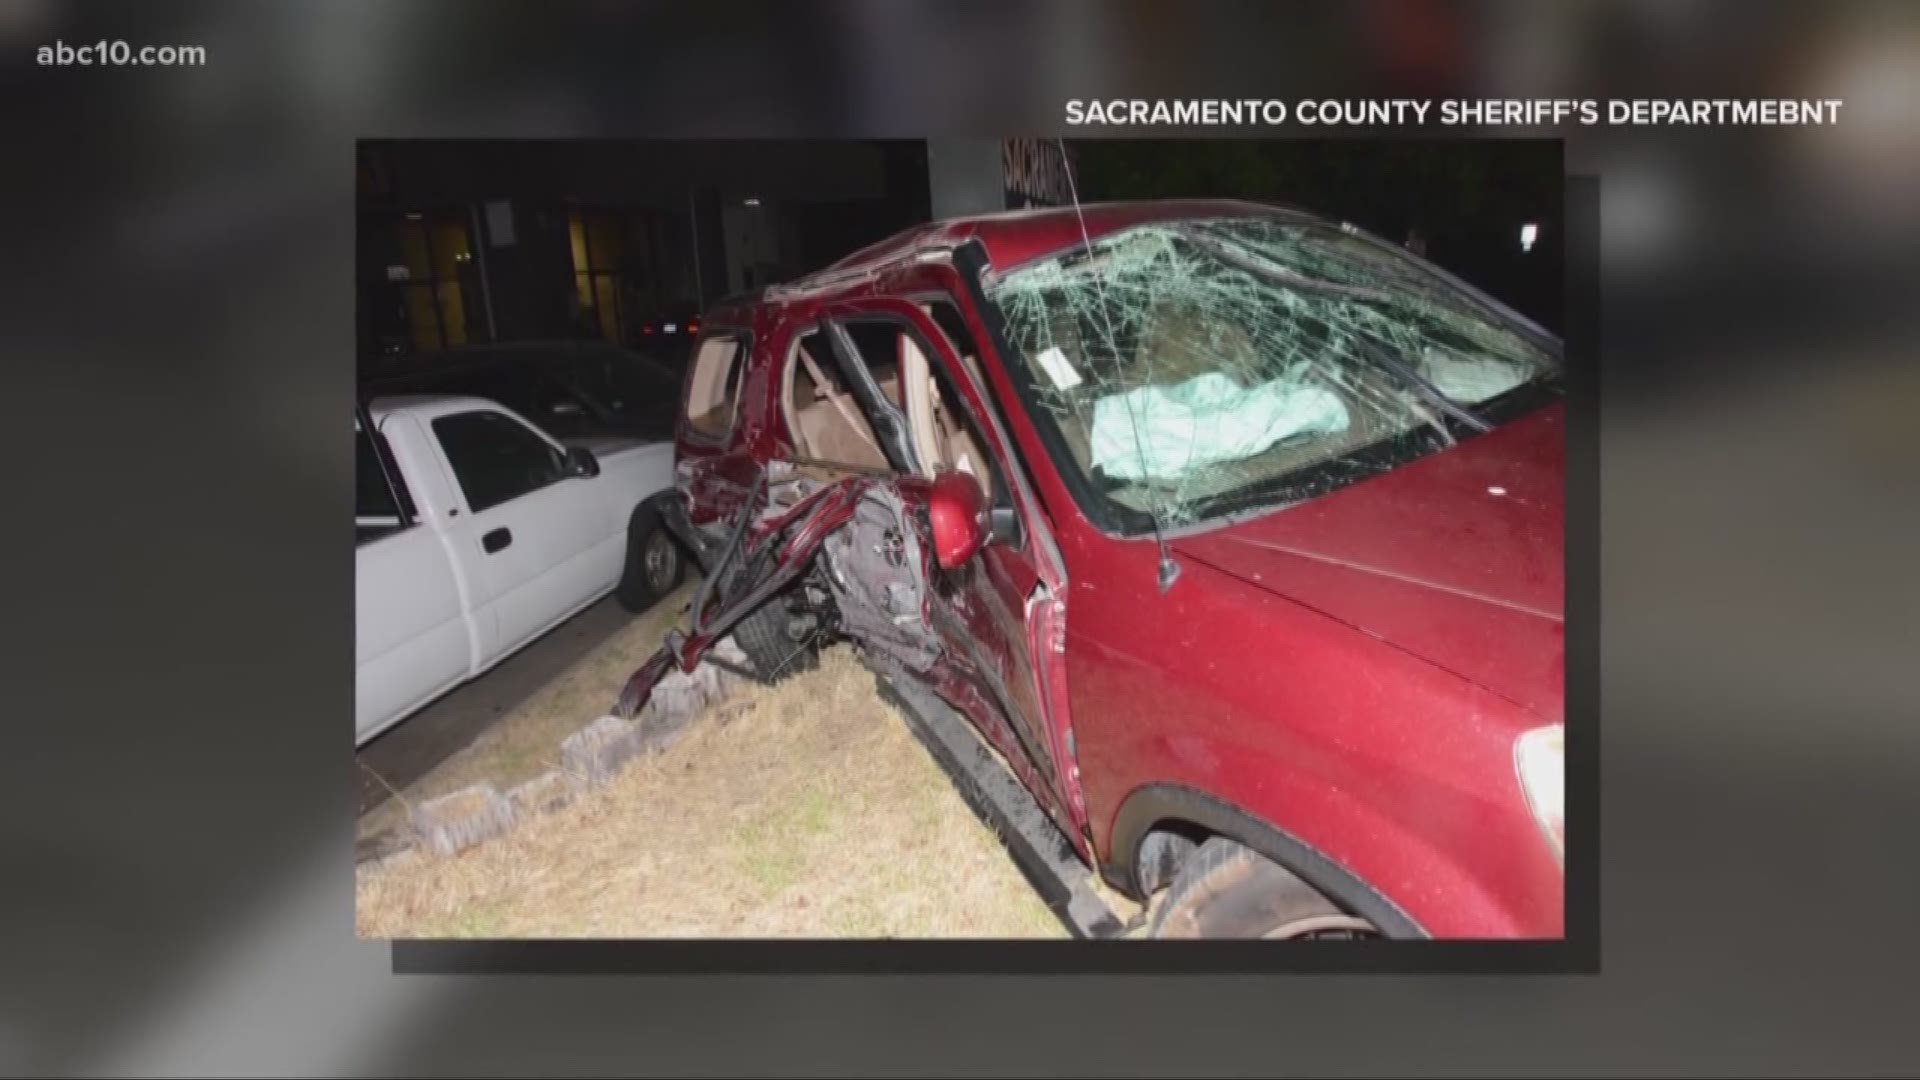 A Sacramento County Sheriff’s deputy Sean Steen was rushing to a call, when his vehicle collided with the Awad family in their Honda CRV.